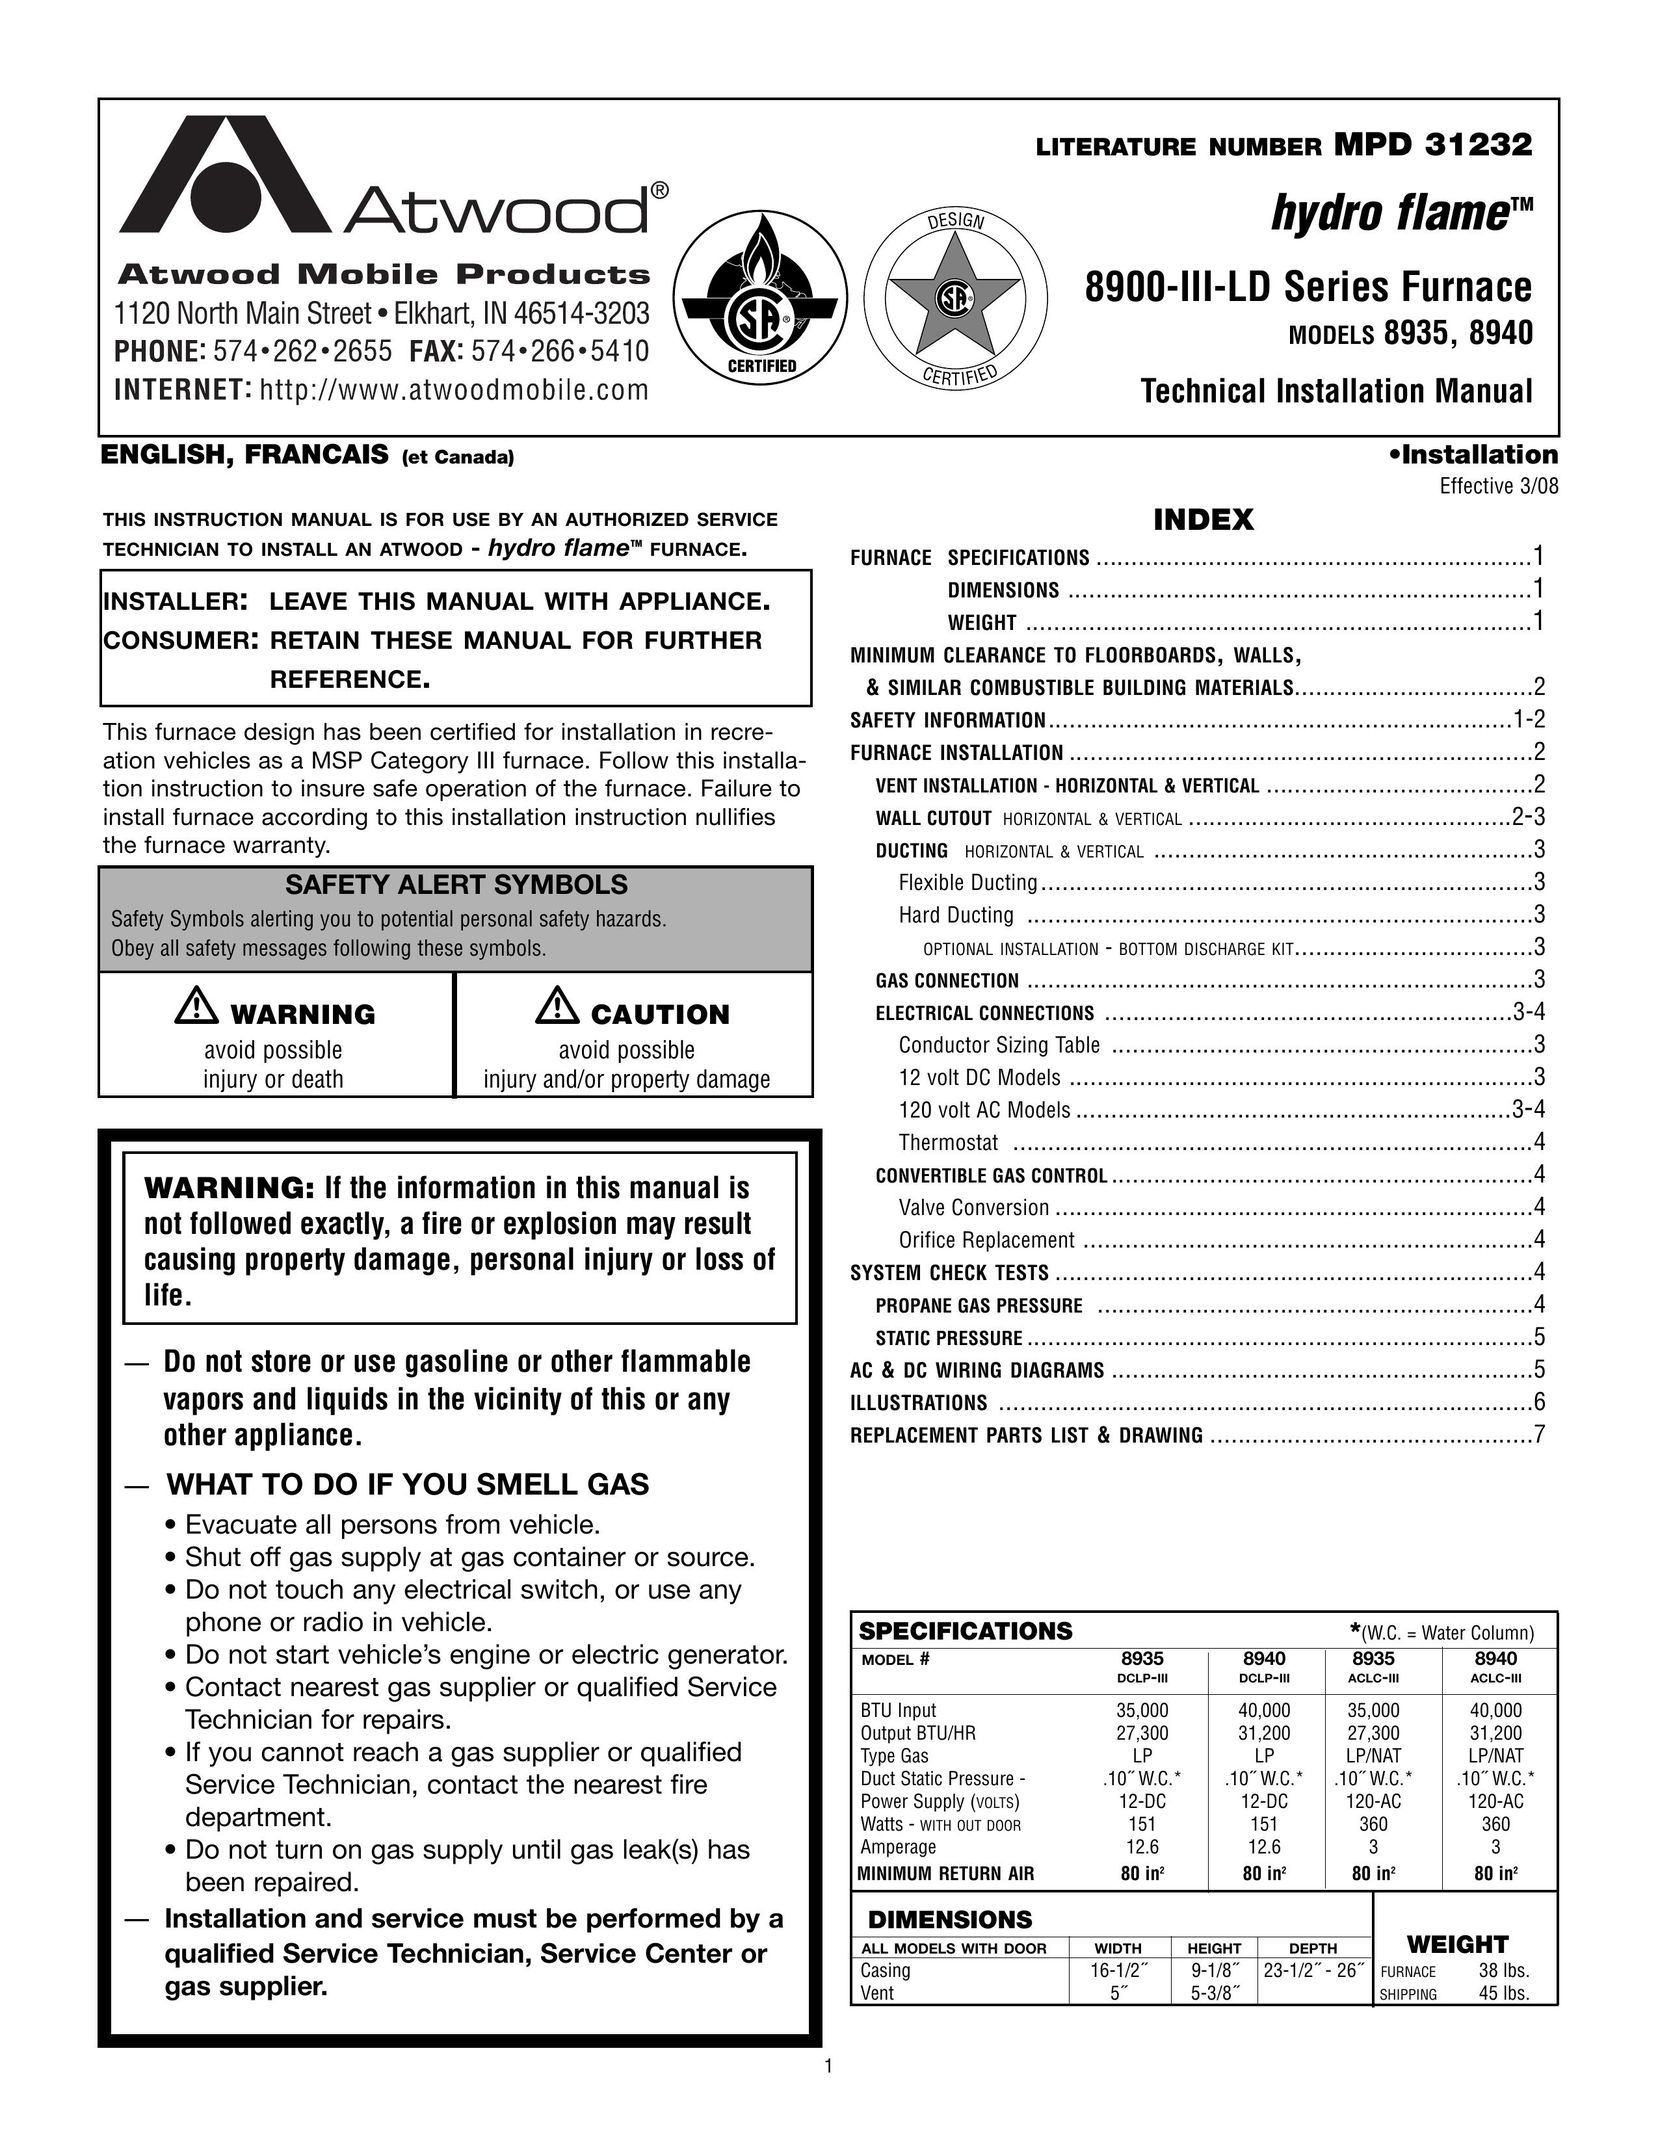 Atwood Mobile Products 8940 Furnace User Manual